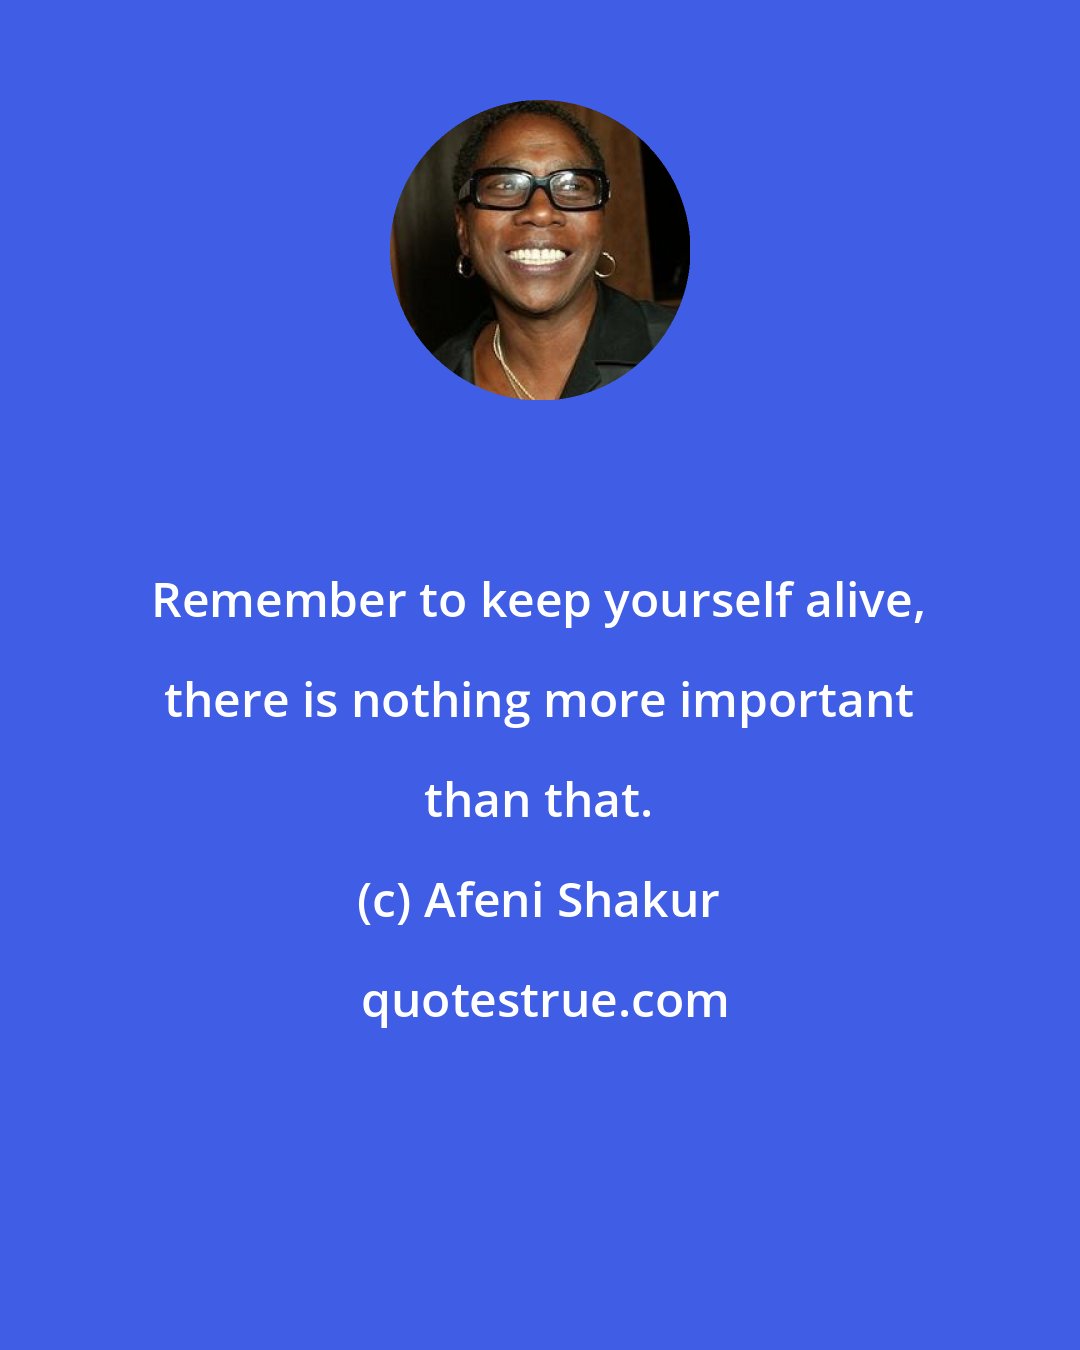 Afeni Shakur: Remember to keep yourself alive, there is nothing more important than that.